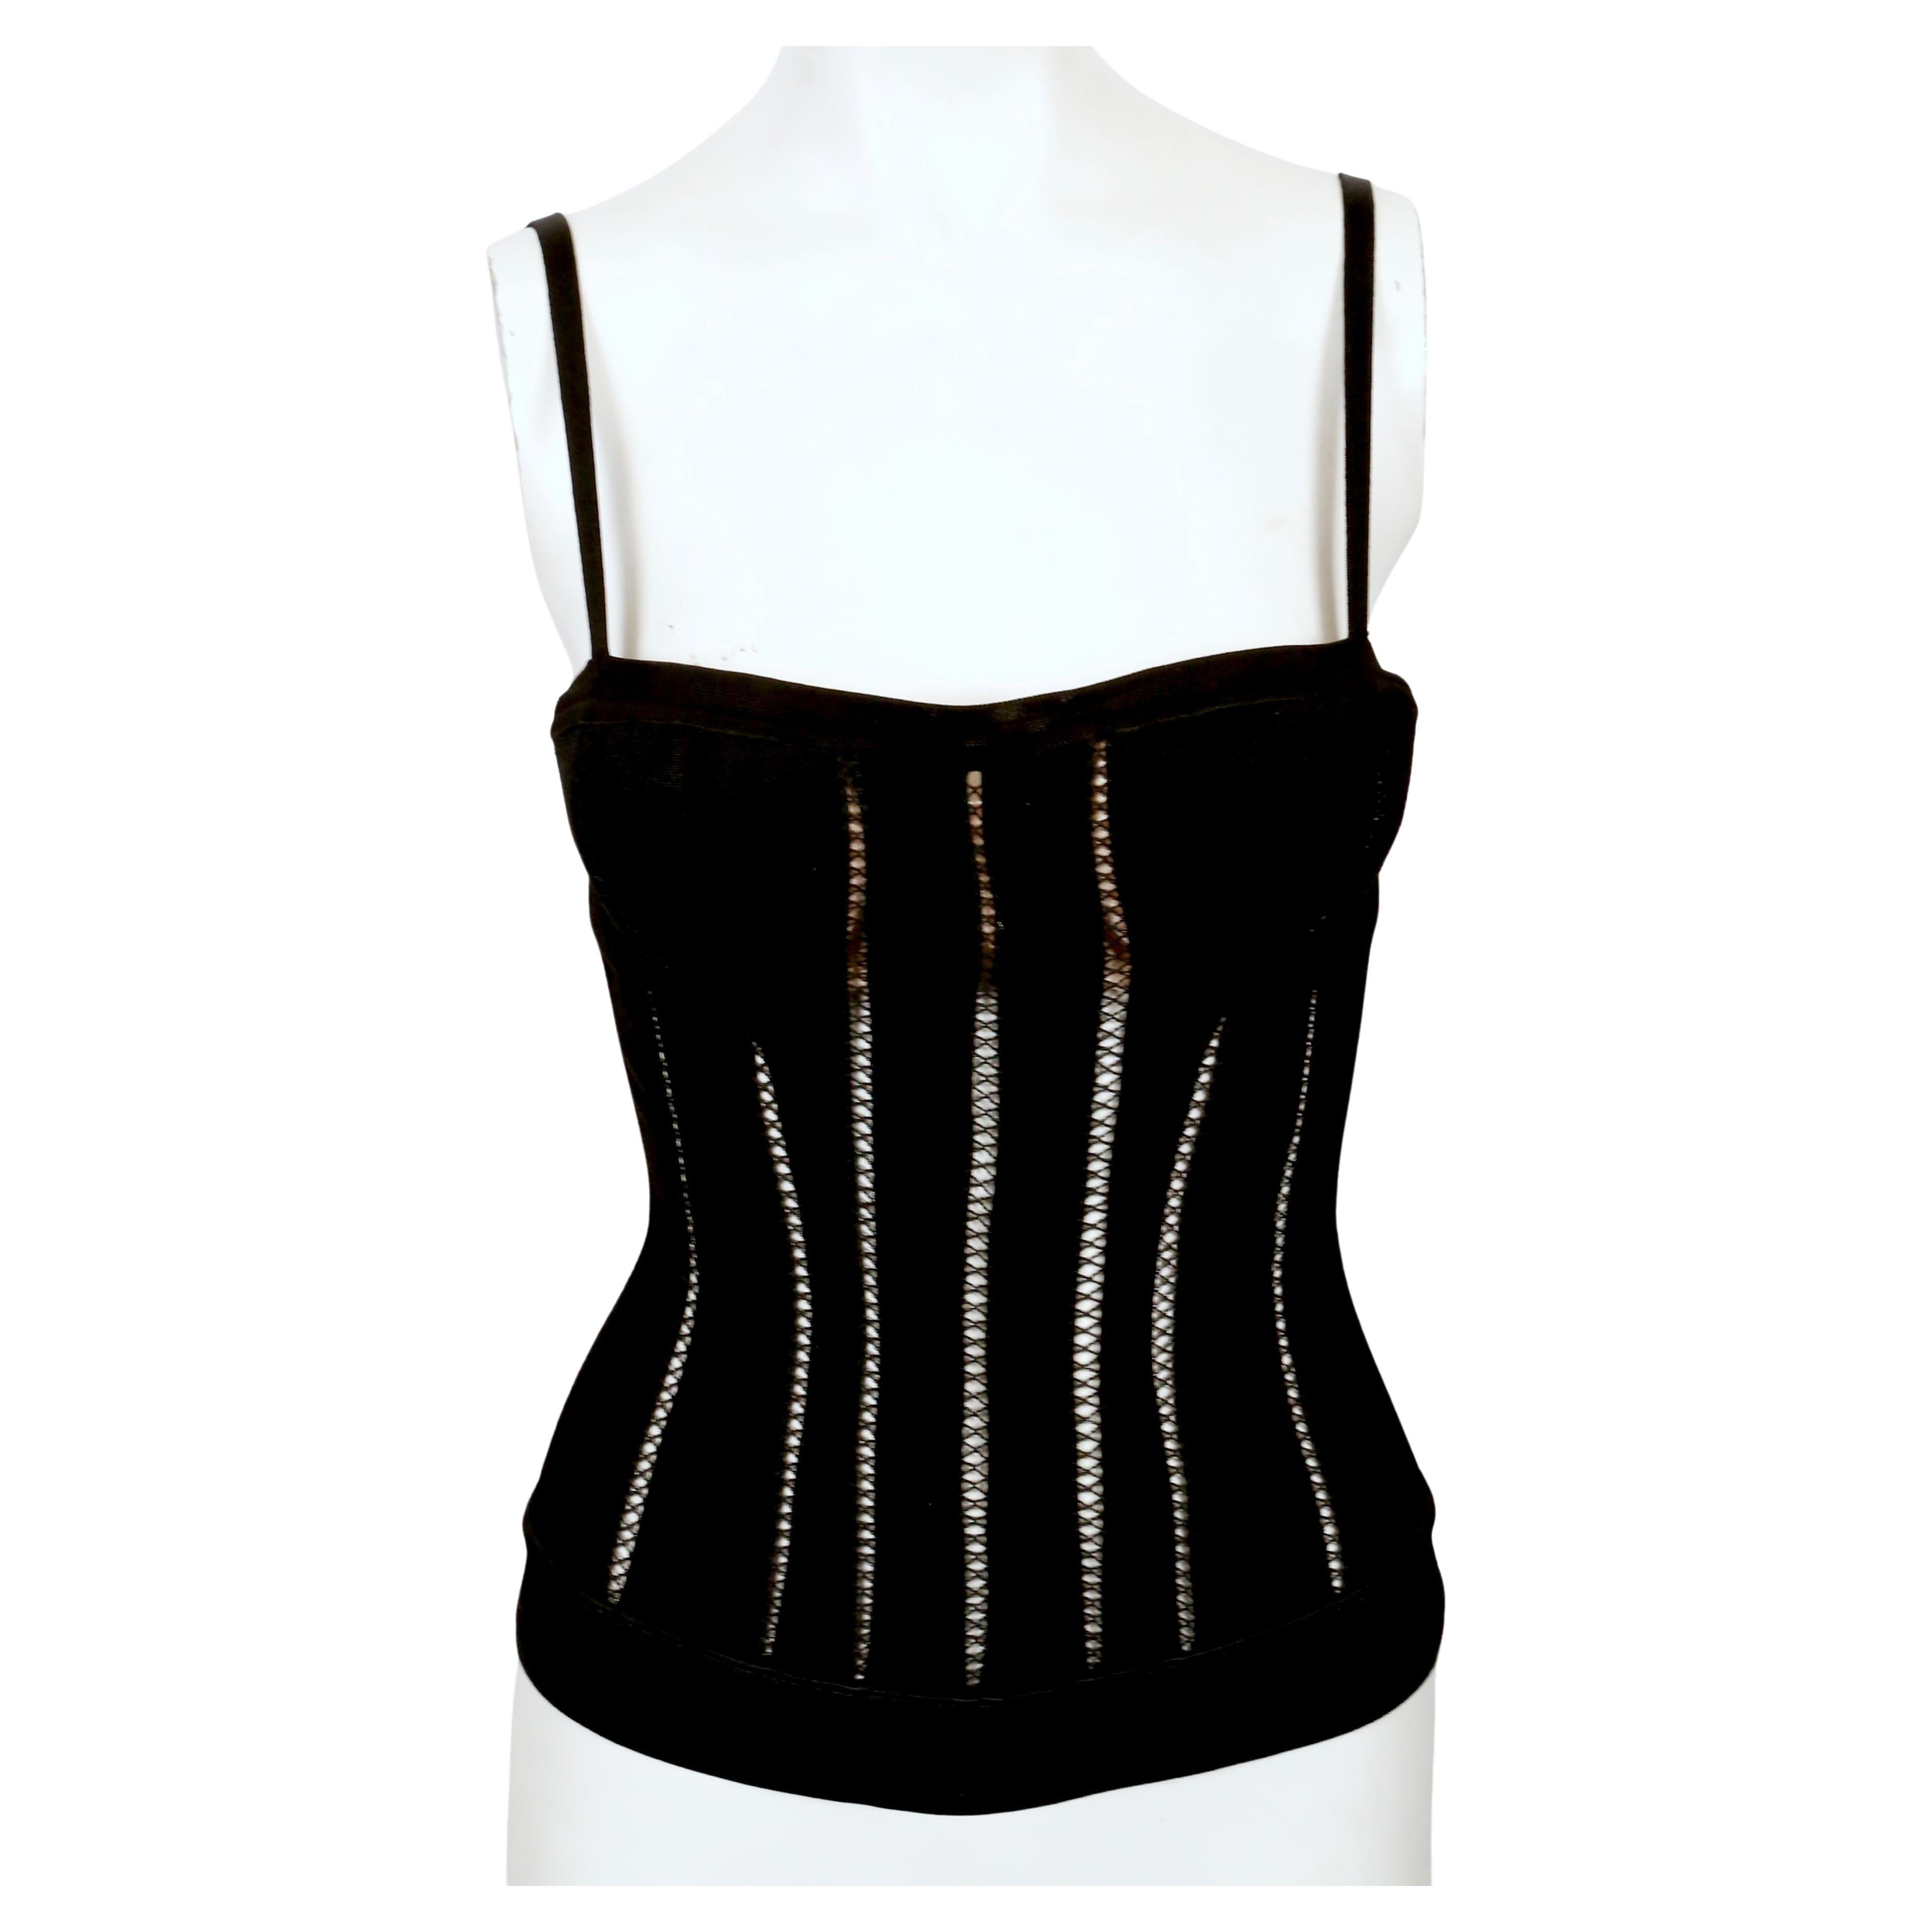 Black knit corset top with decorative stitching and attached padded push-up bra designed by Azzedine Alaia dating exactly as seen on the fall 1991 runway and countless editorials. Labeled a Size 'S' and best fits an XS or S.  Made in Italy. Center